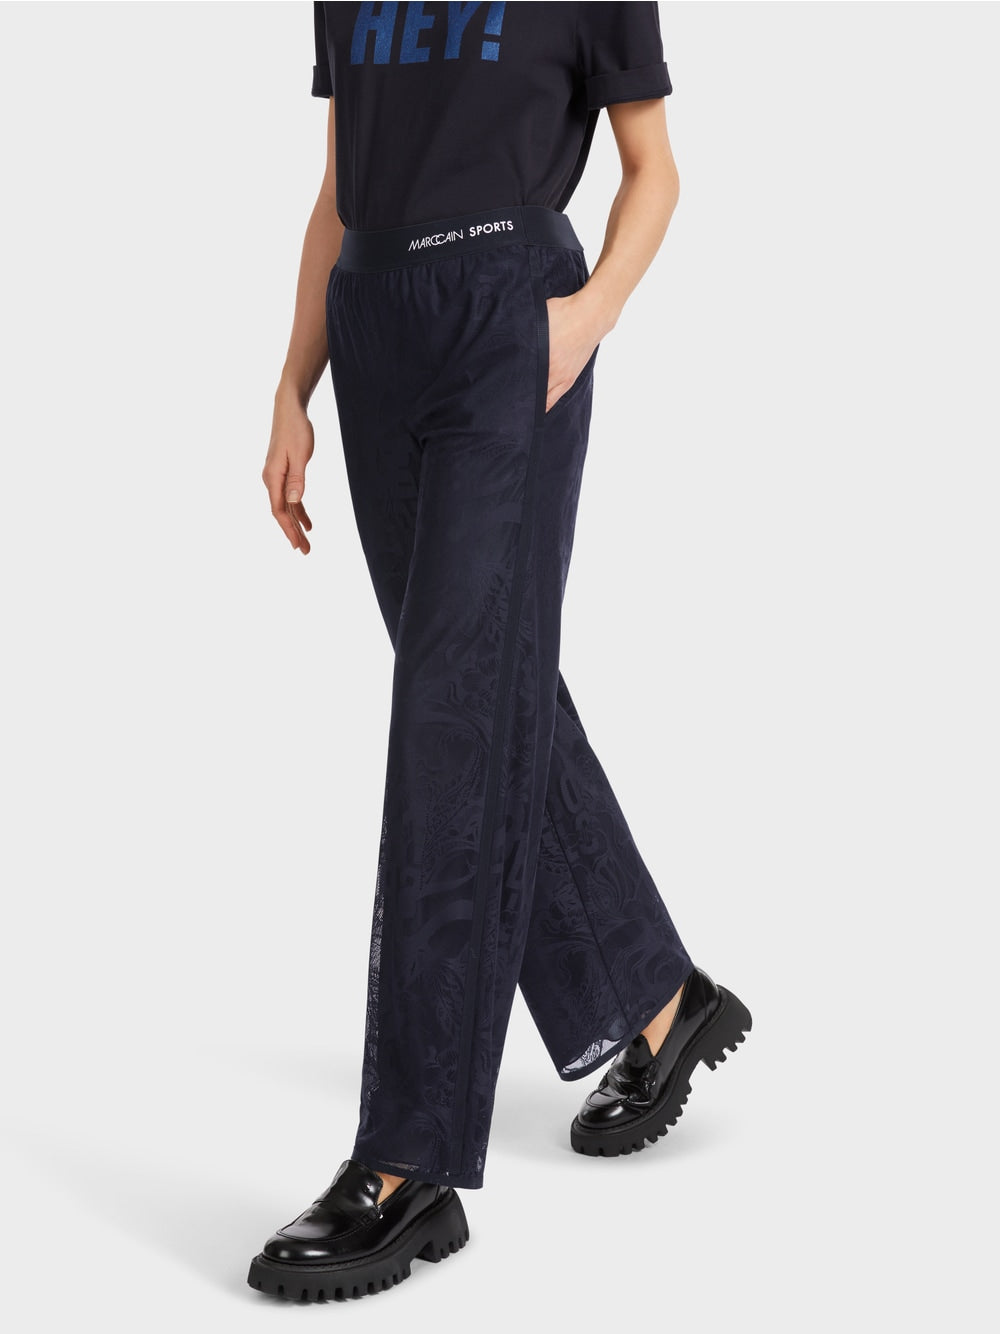 Marc Cain Welby Pant in Tulle Lace